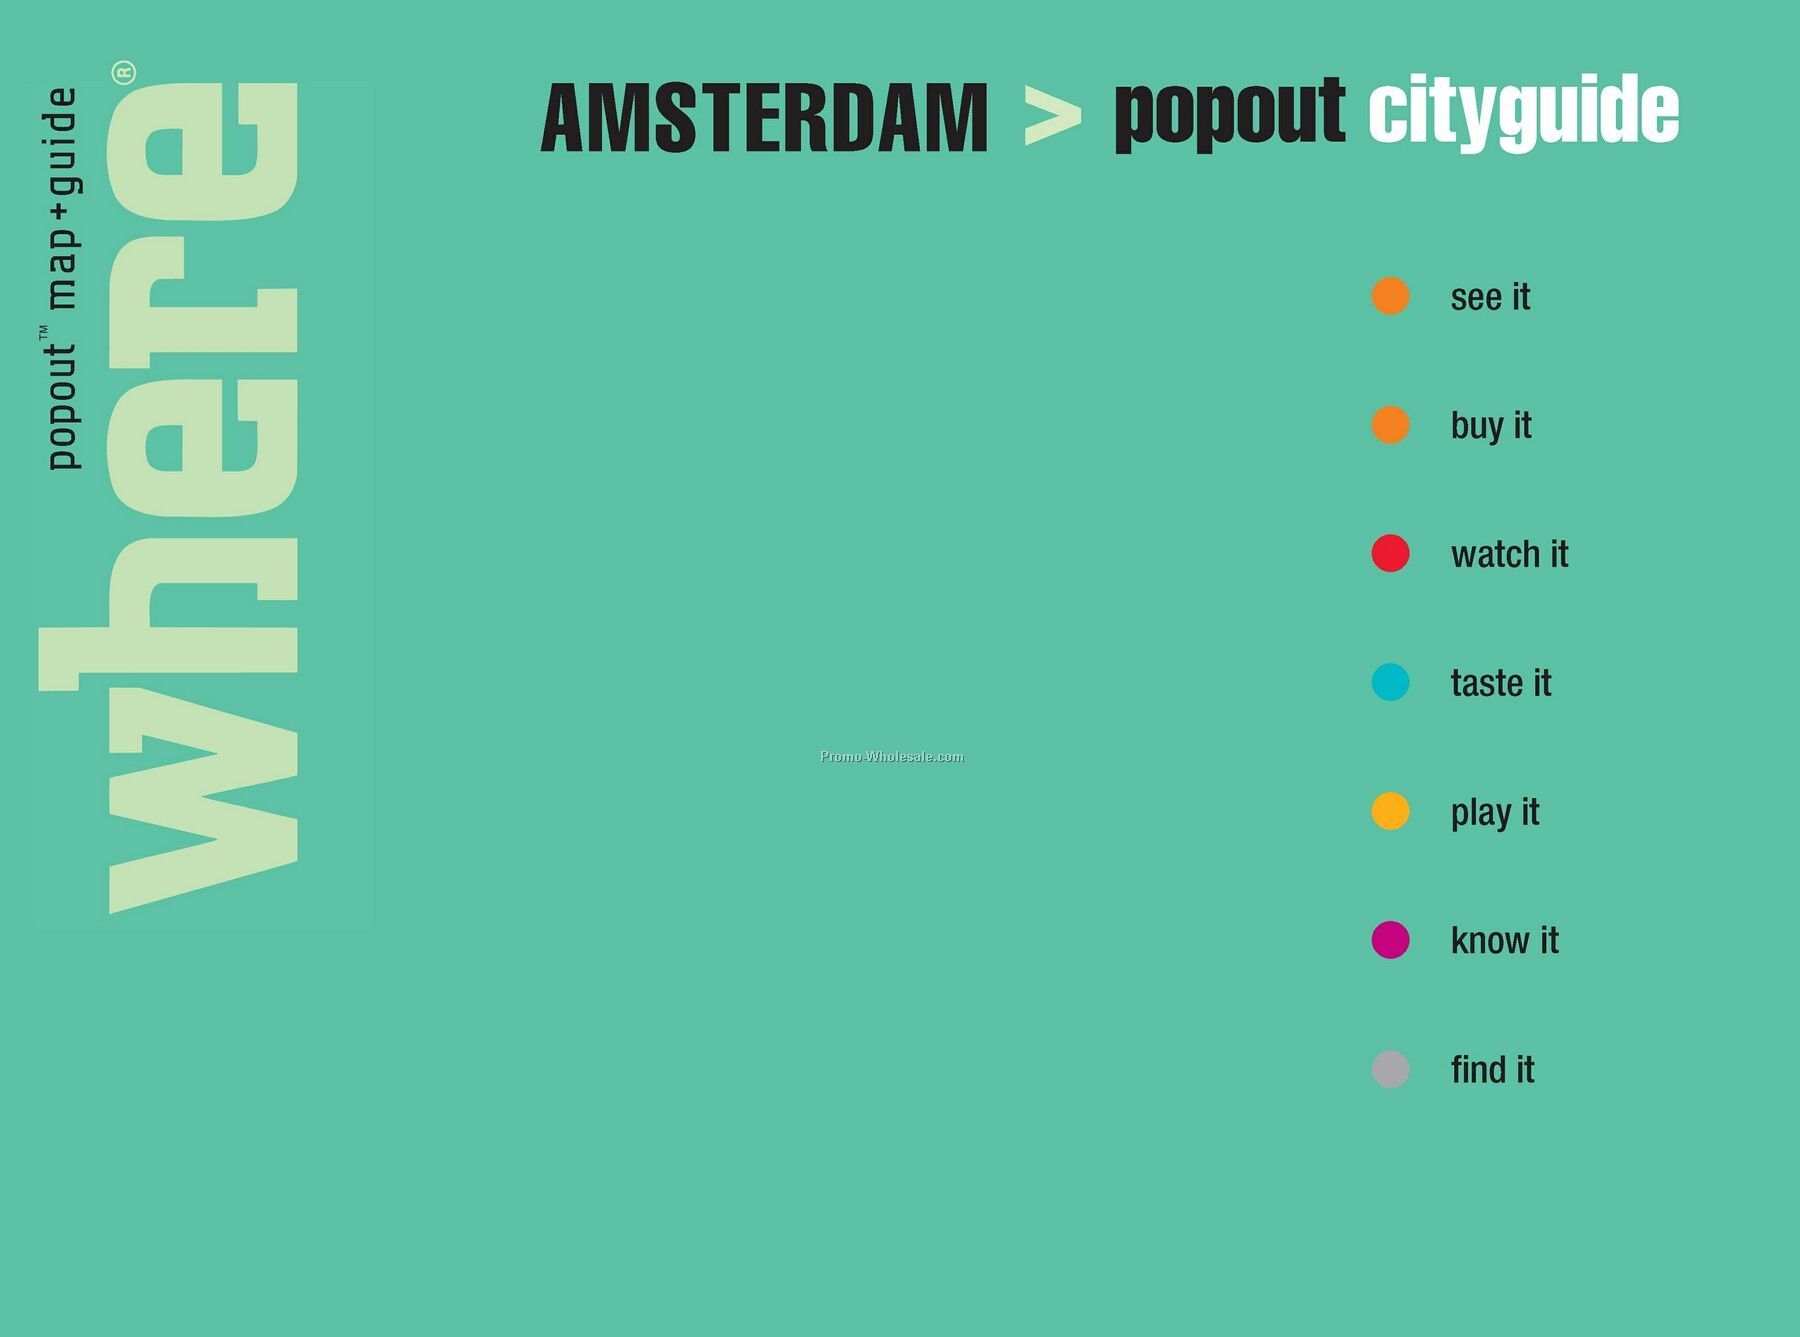 Travel Guides - International Guide Of Amsterdam - Featuring Popout Maps